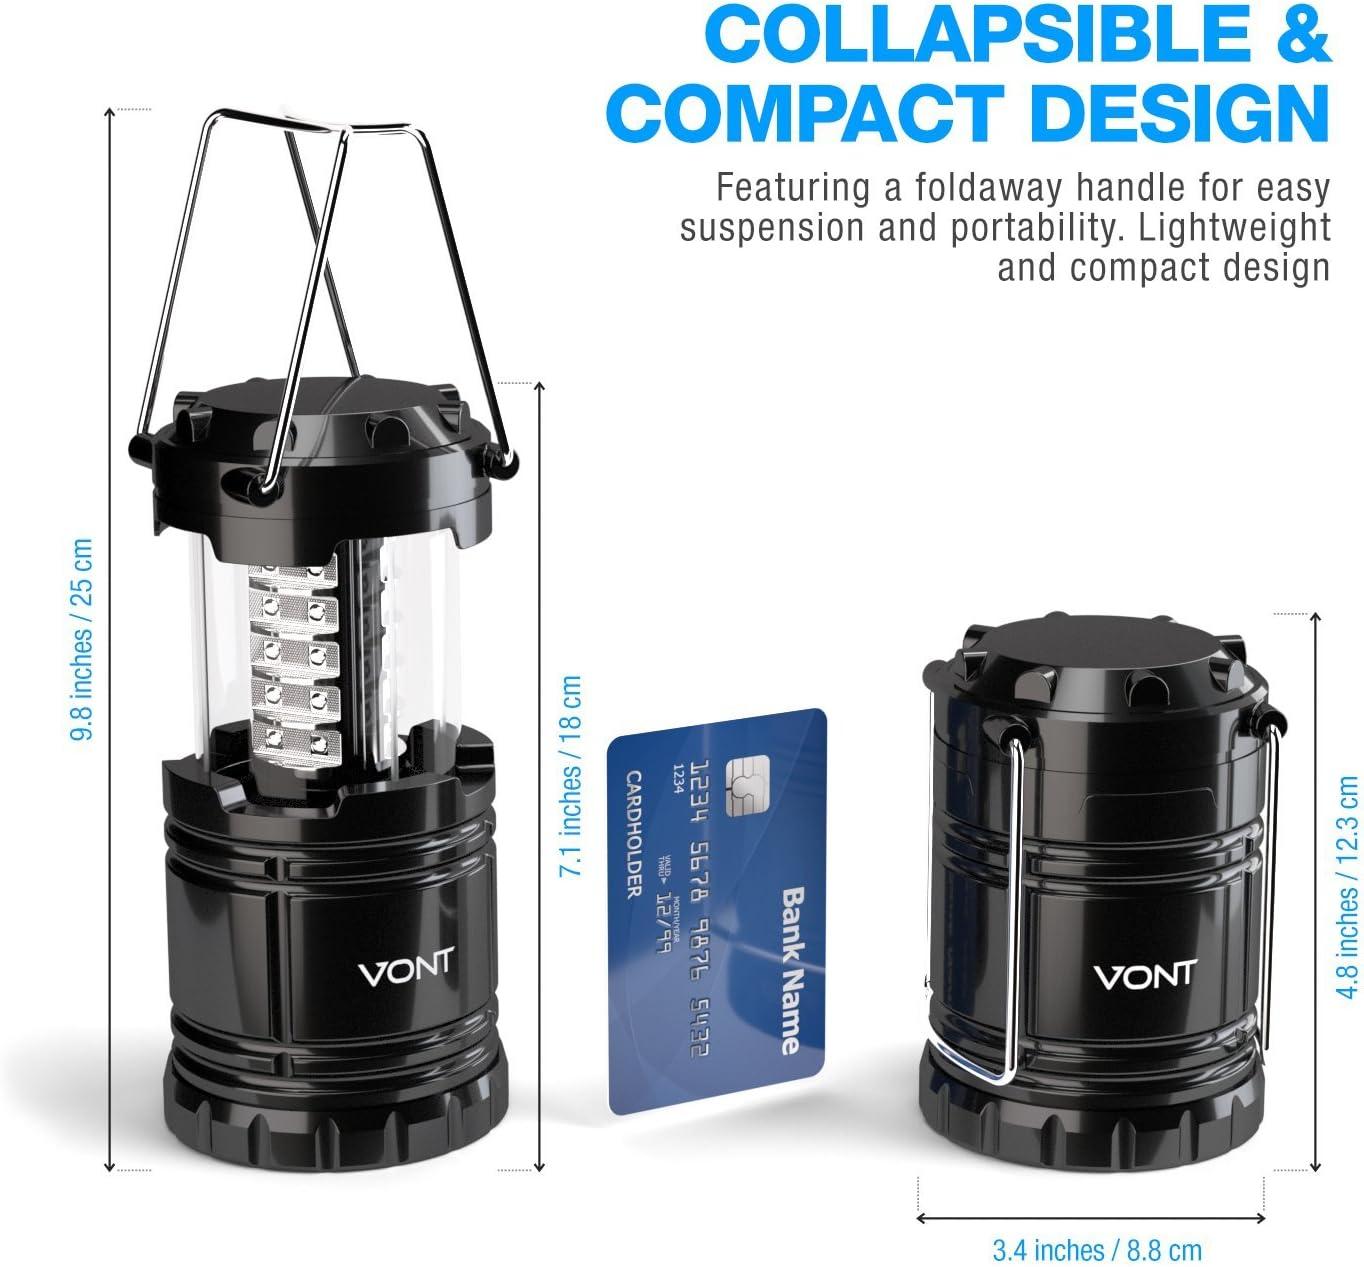 Etekcity 4 Pack Portable LED Camping Lantern with 12 AA Batteries